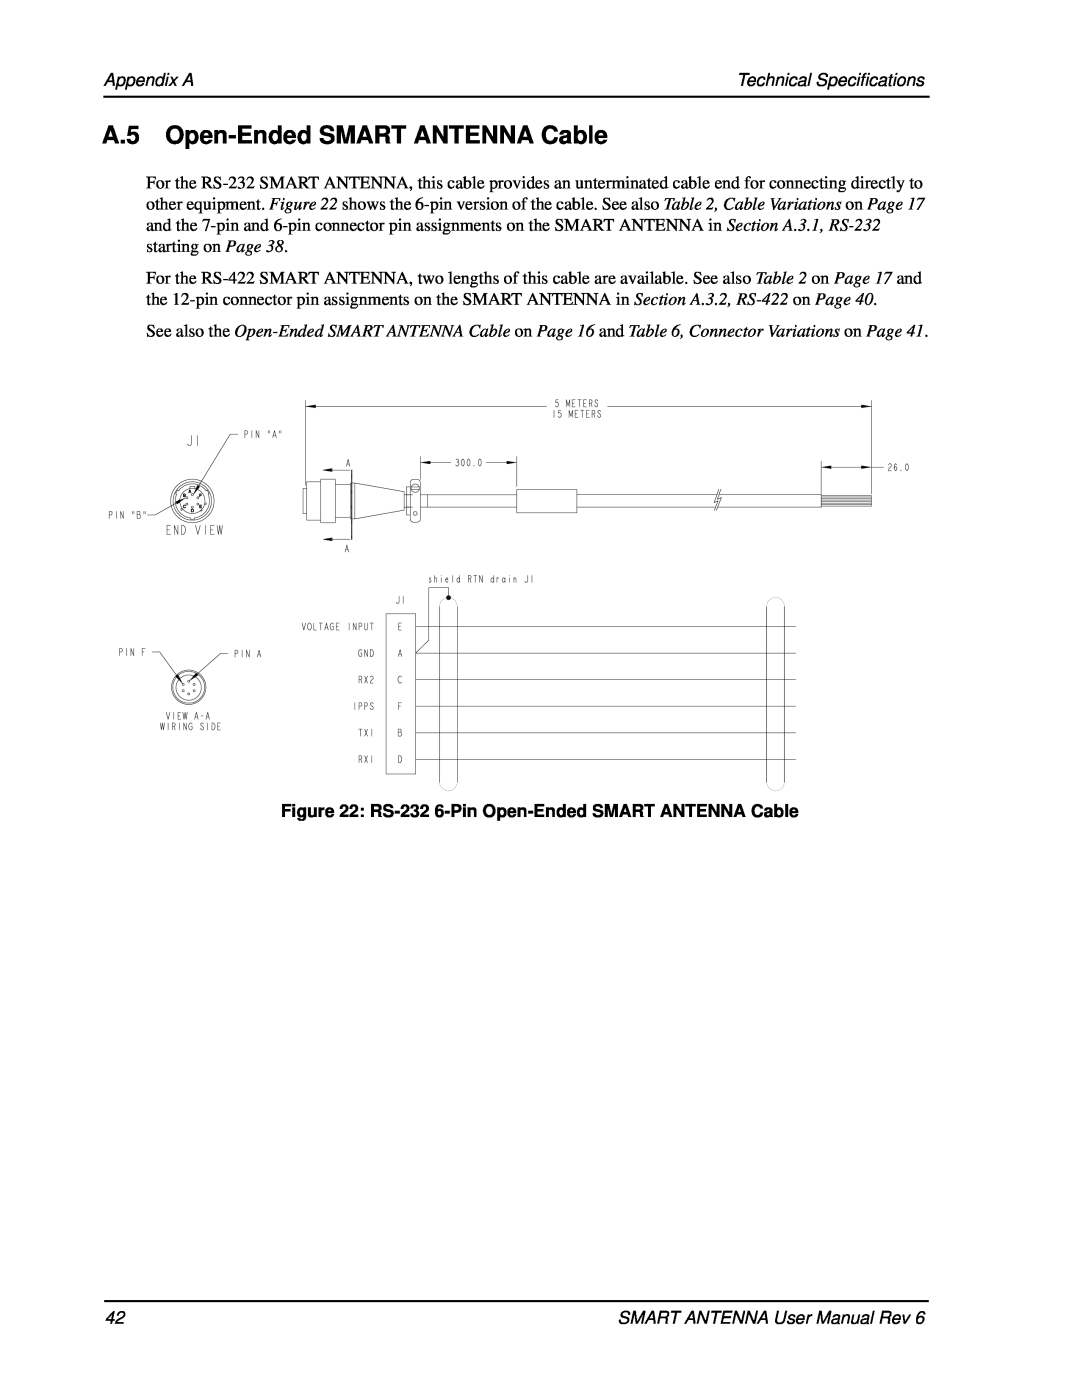 Novatel user manual A.5 Open-EndedSMART ANTENNA Cable, Appendix A, Technical Specifications 